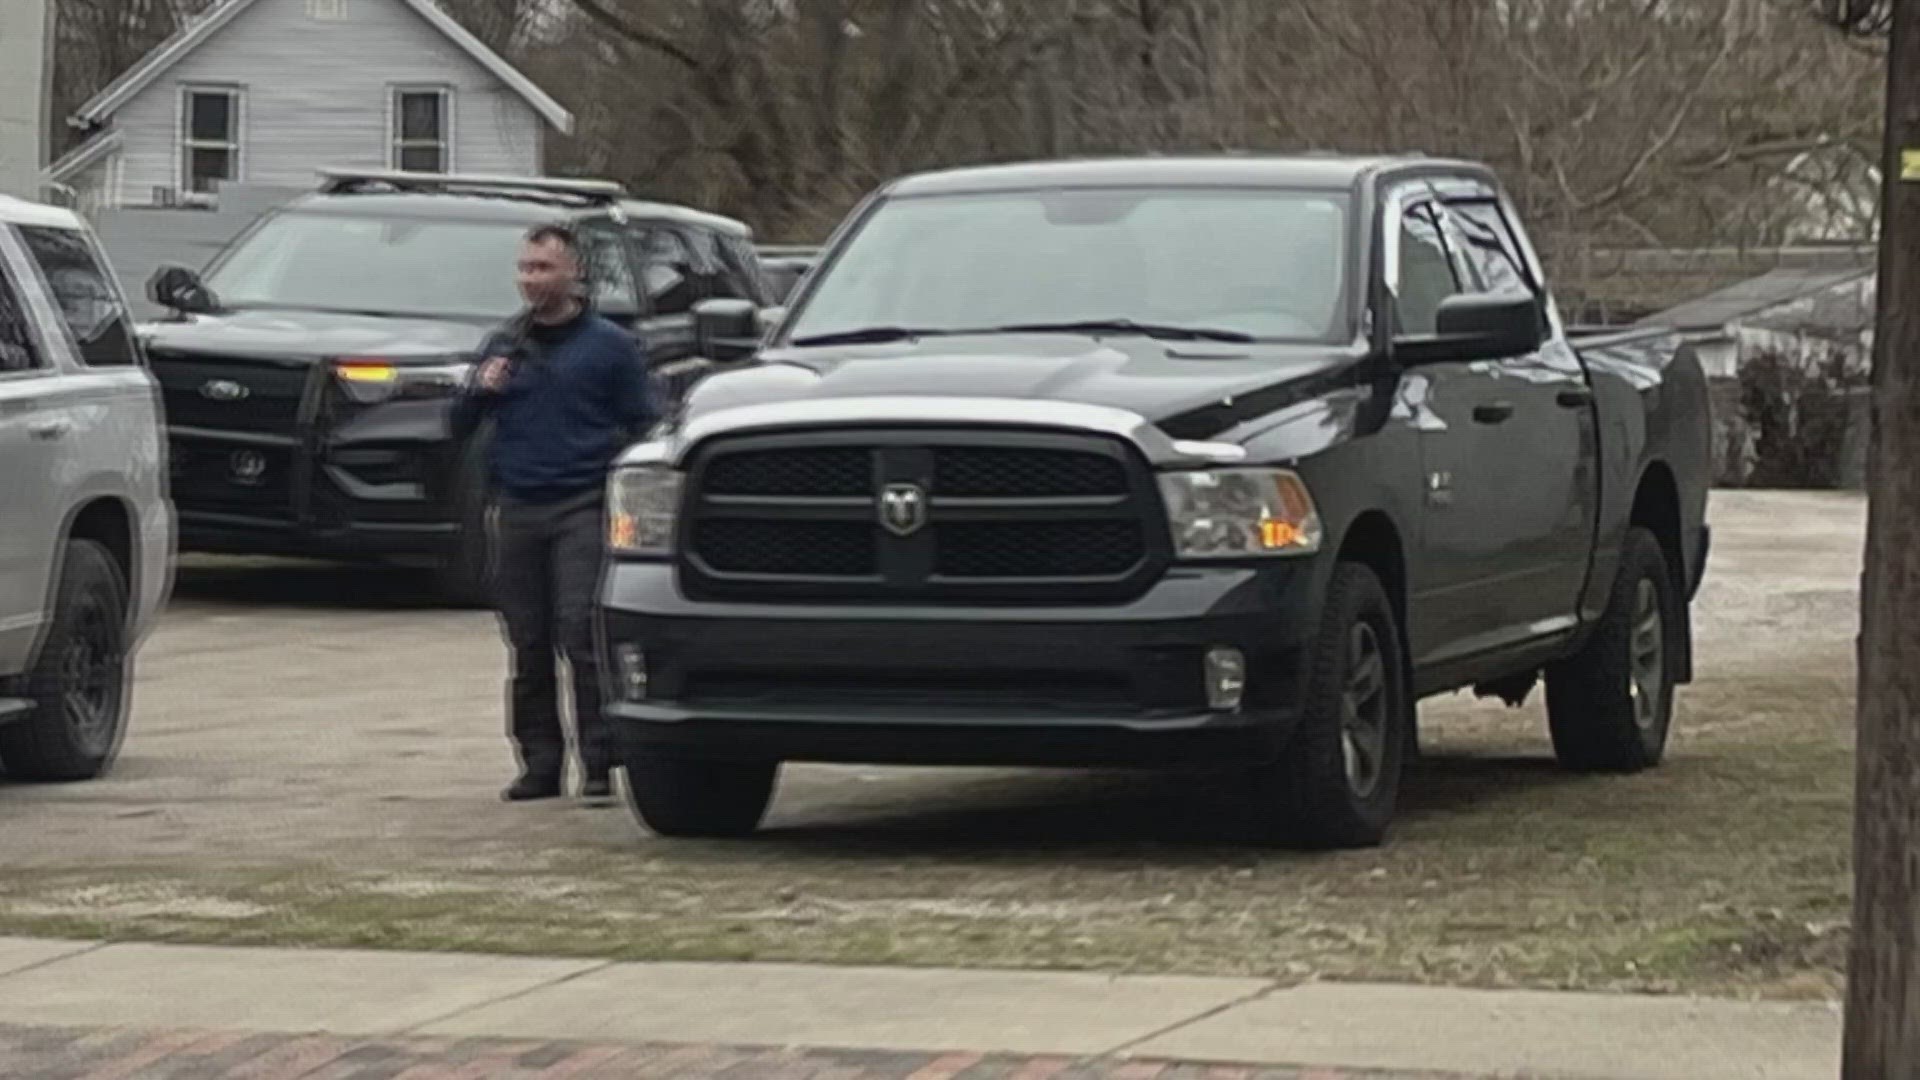 Authorities say a Black 2017 Dodge Ram 1500 pickup truck was taken from the Marshallville Dollar General with a 2-year-old child in the back sleeping.